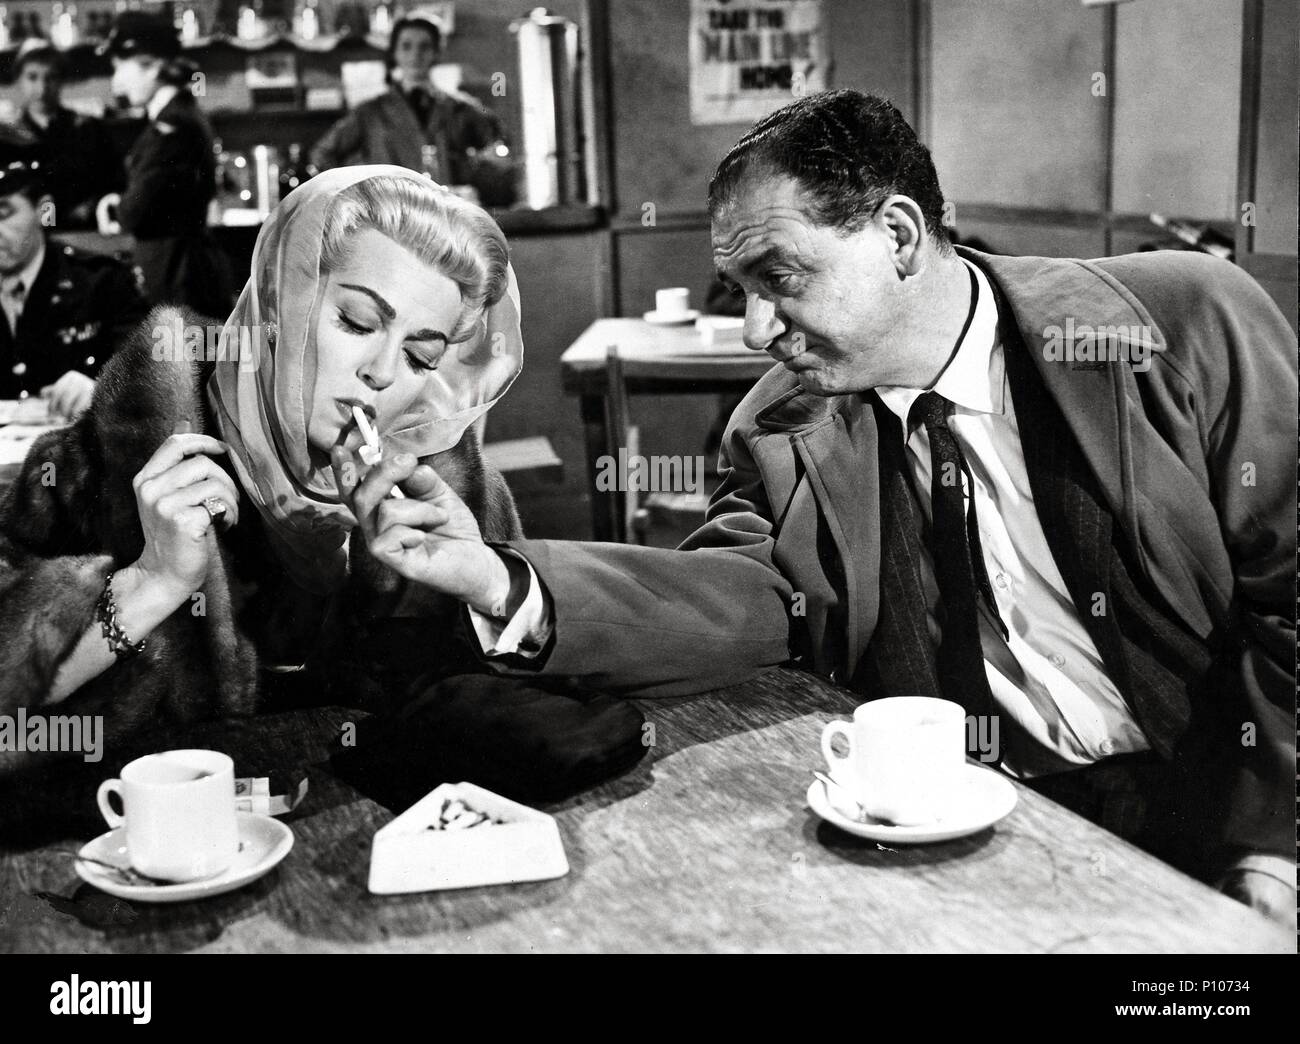 Original Film Title: ANOTHER TIME, ANOTHER PLACE.  English Title: ANOTHER TIME, ANOTHER PLACE.  Film Director: LEWIS ALLEN.  Year: 1958.  Stars: LANA TURNER; SID JAMES. Credit: PARAMOUNT PICTURES / Album Stock Photo